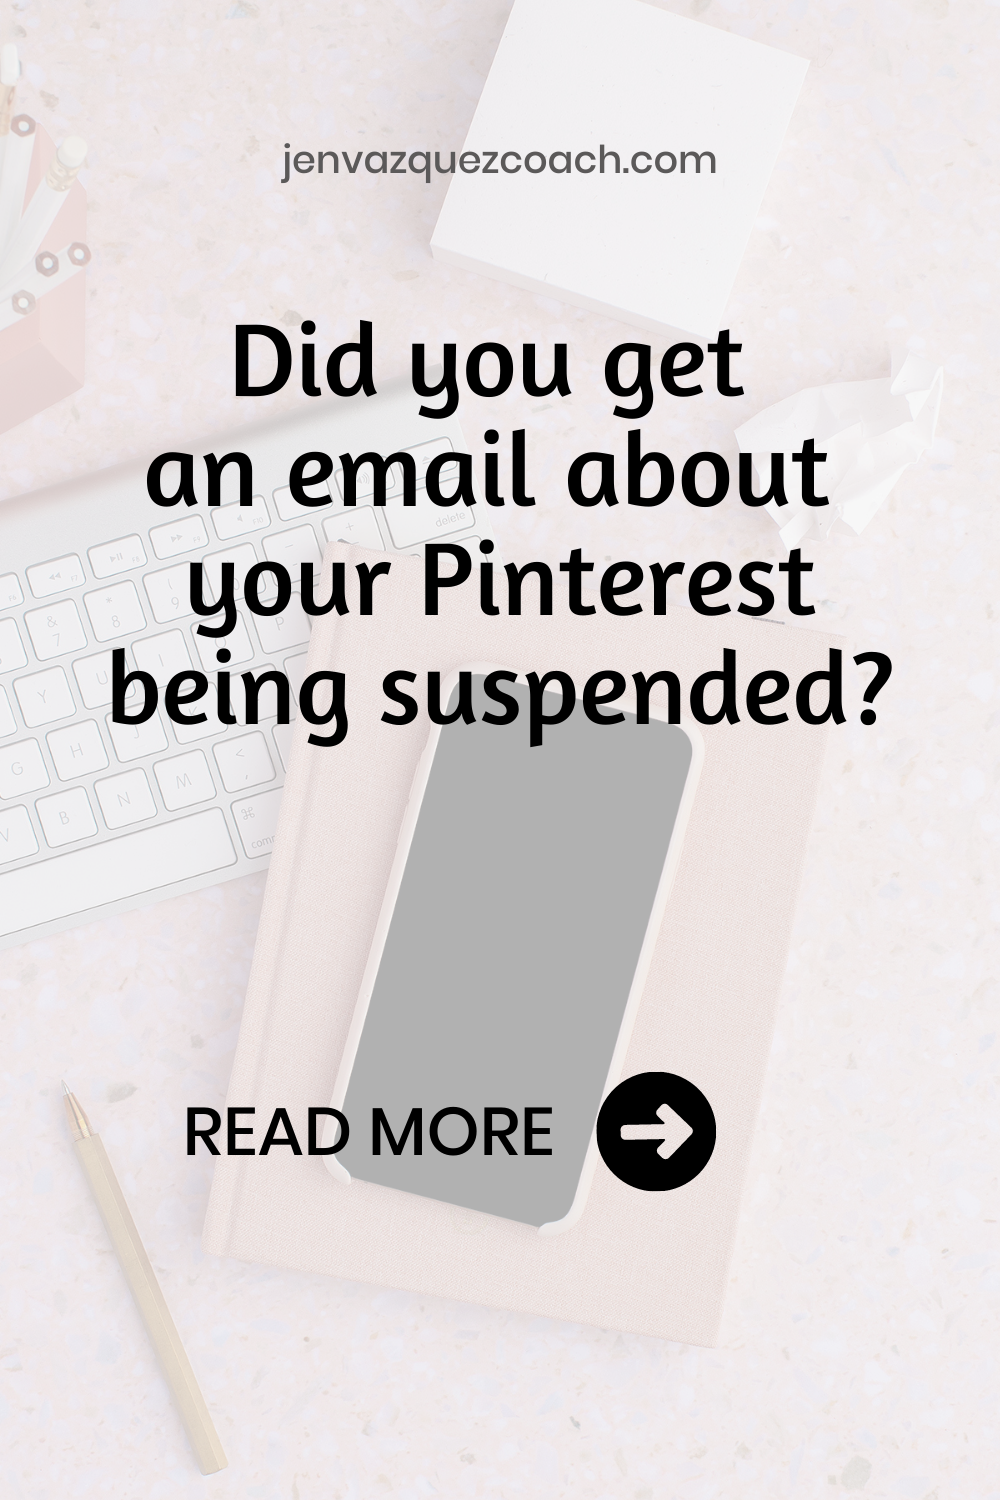 Did you get an email about your Pinterest being suspended?